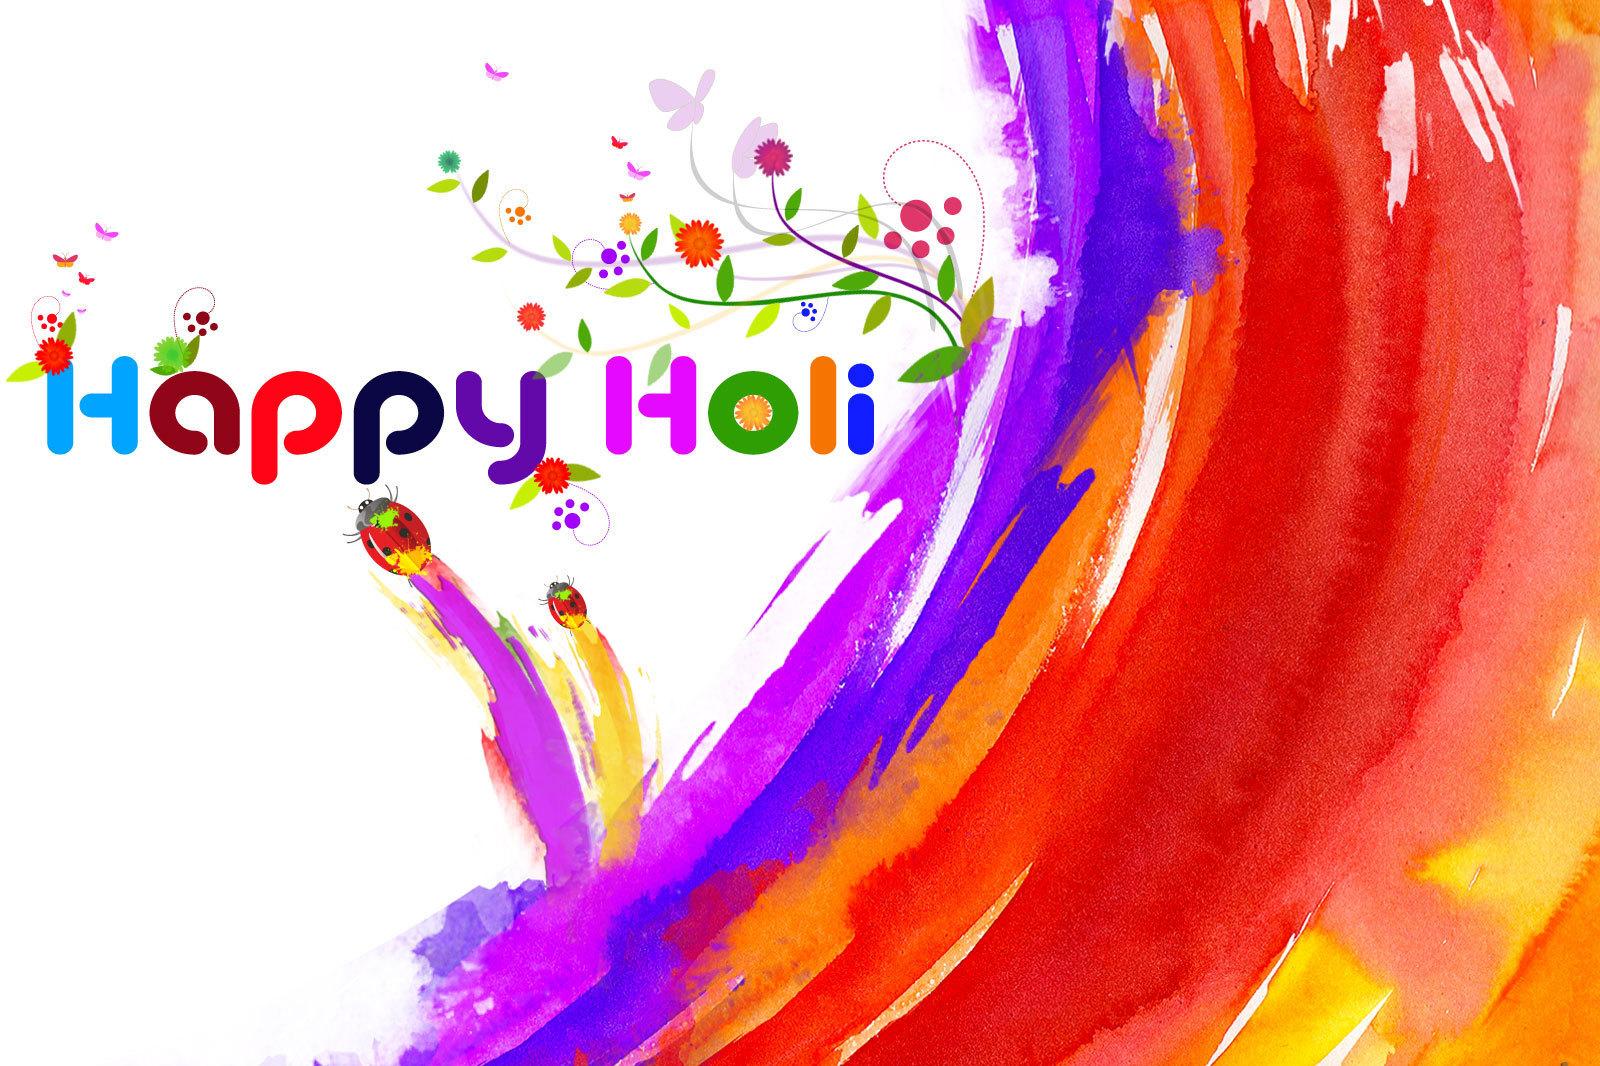 Happy Holi Image Photos Wallpaper Picture & Best Quotes Of Holi